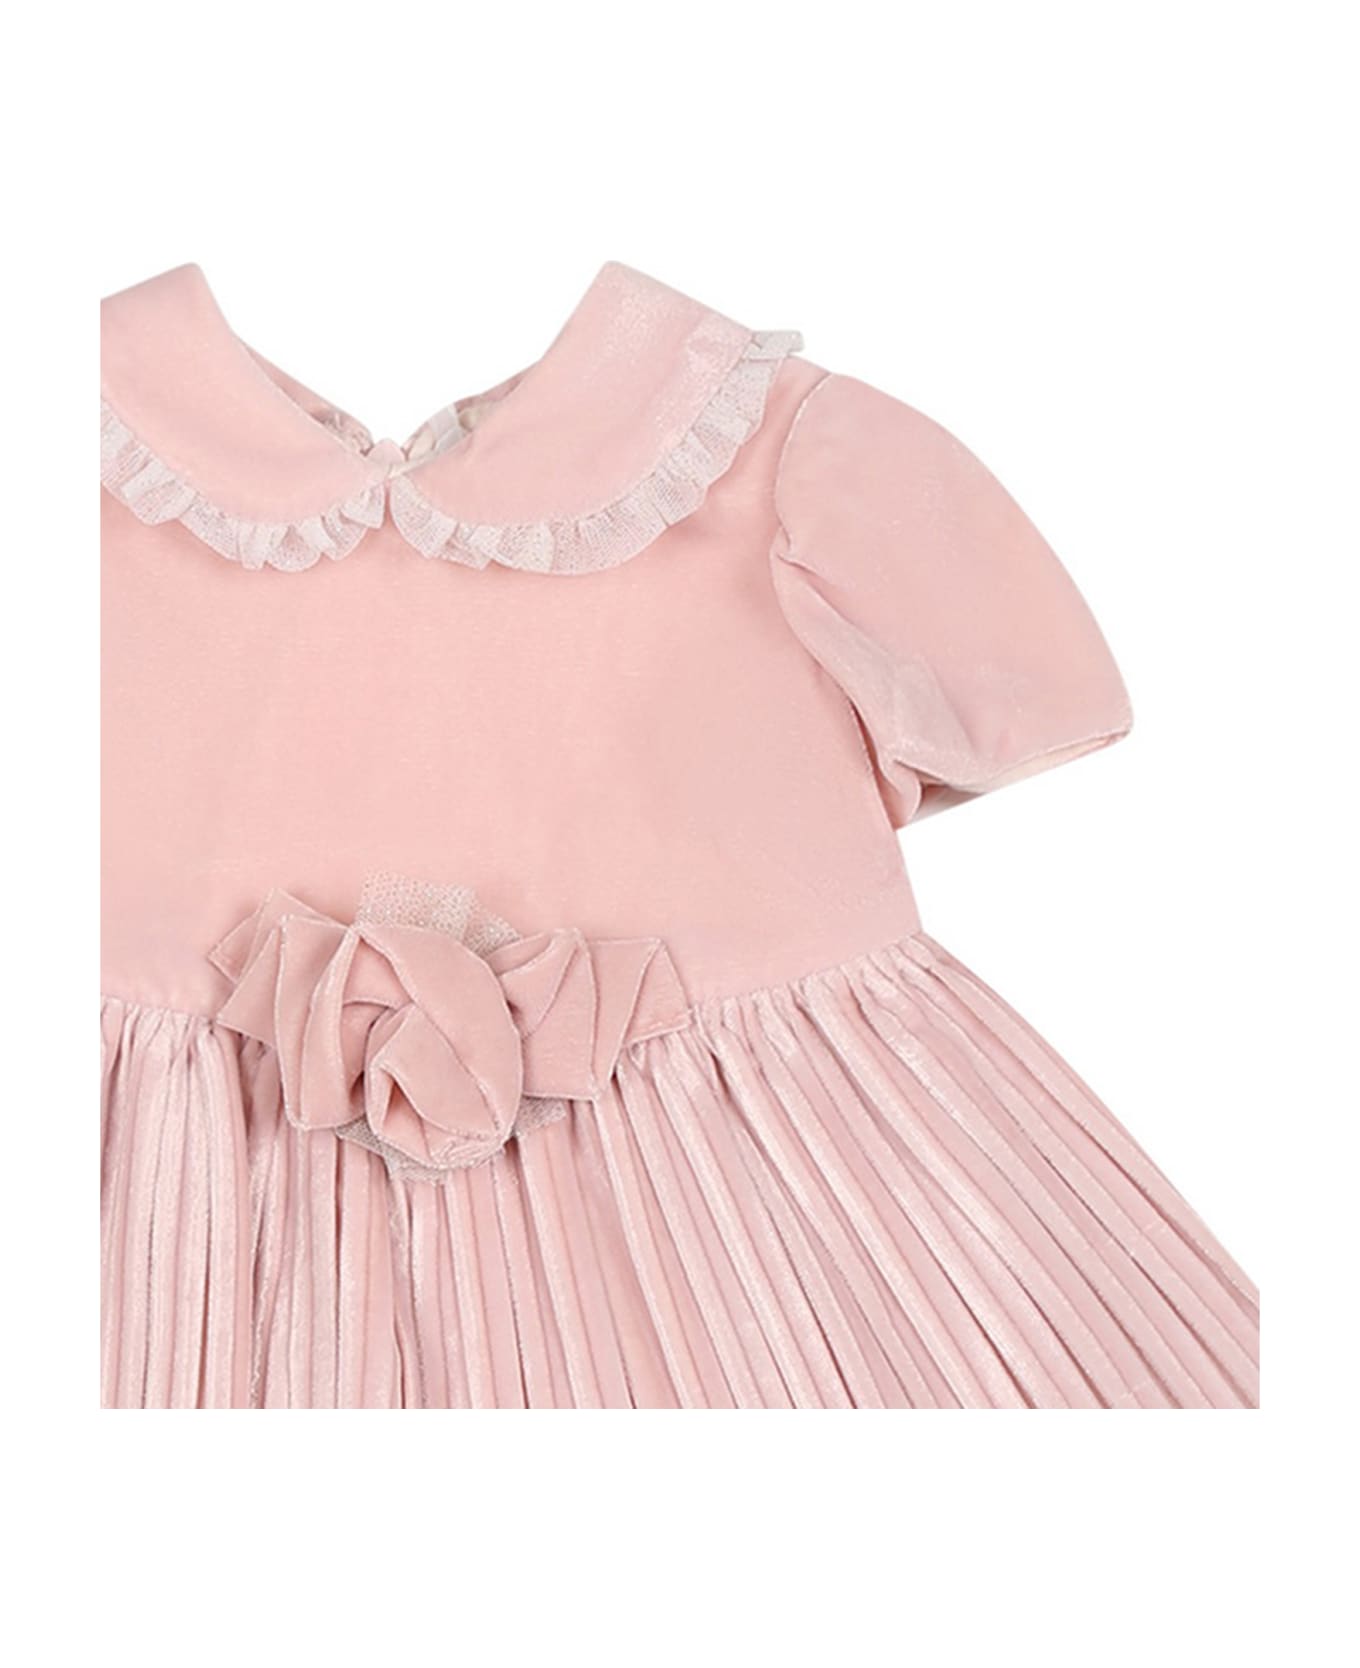 Monnalisa Pink Dress For Baby Girl With Rose - Pink ウェア